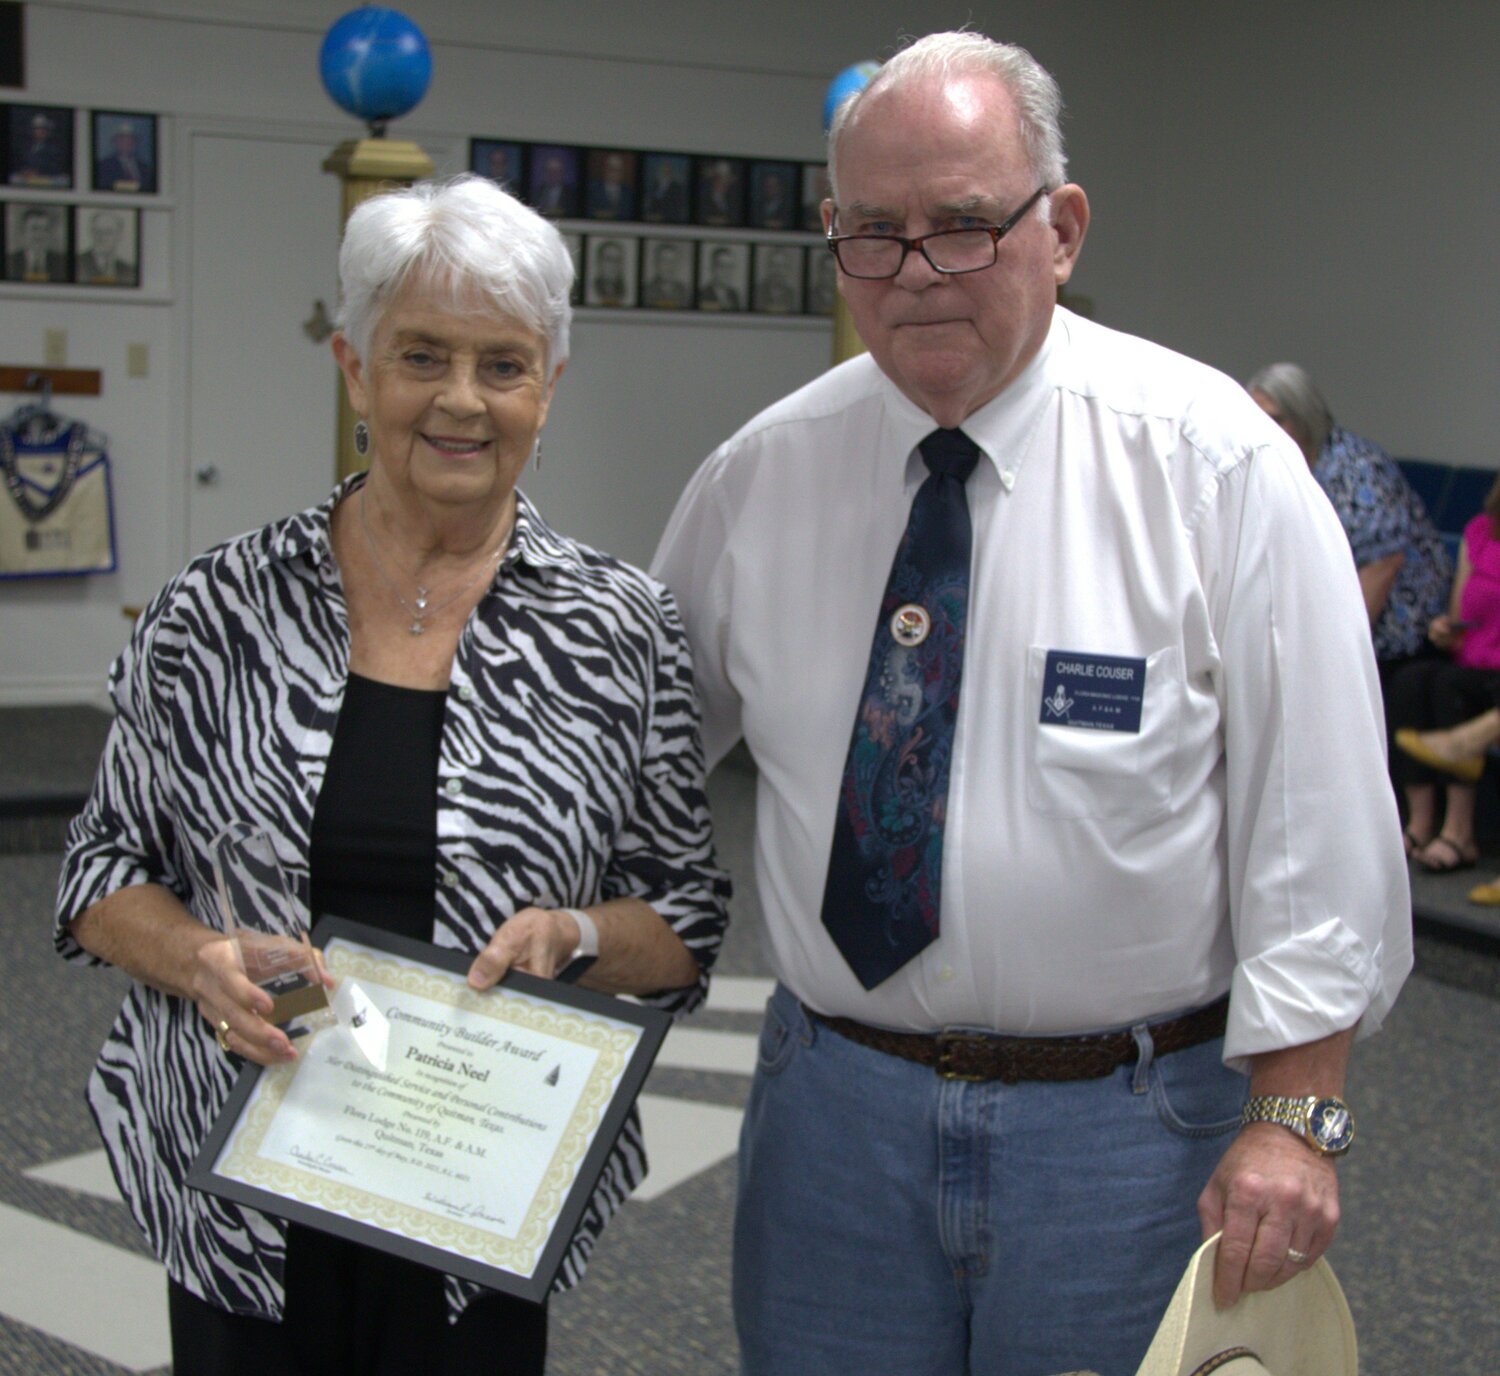 Patricia Neel is congratulated by Worshipful Master Charlie Couser.